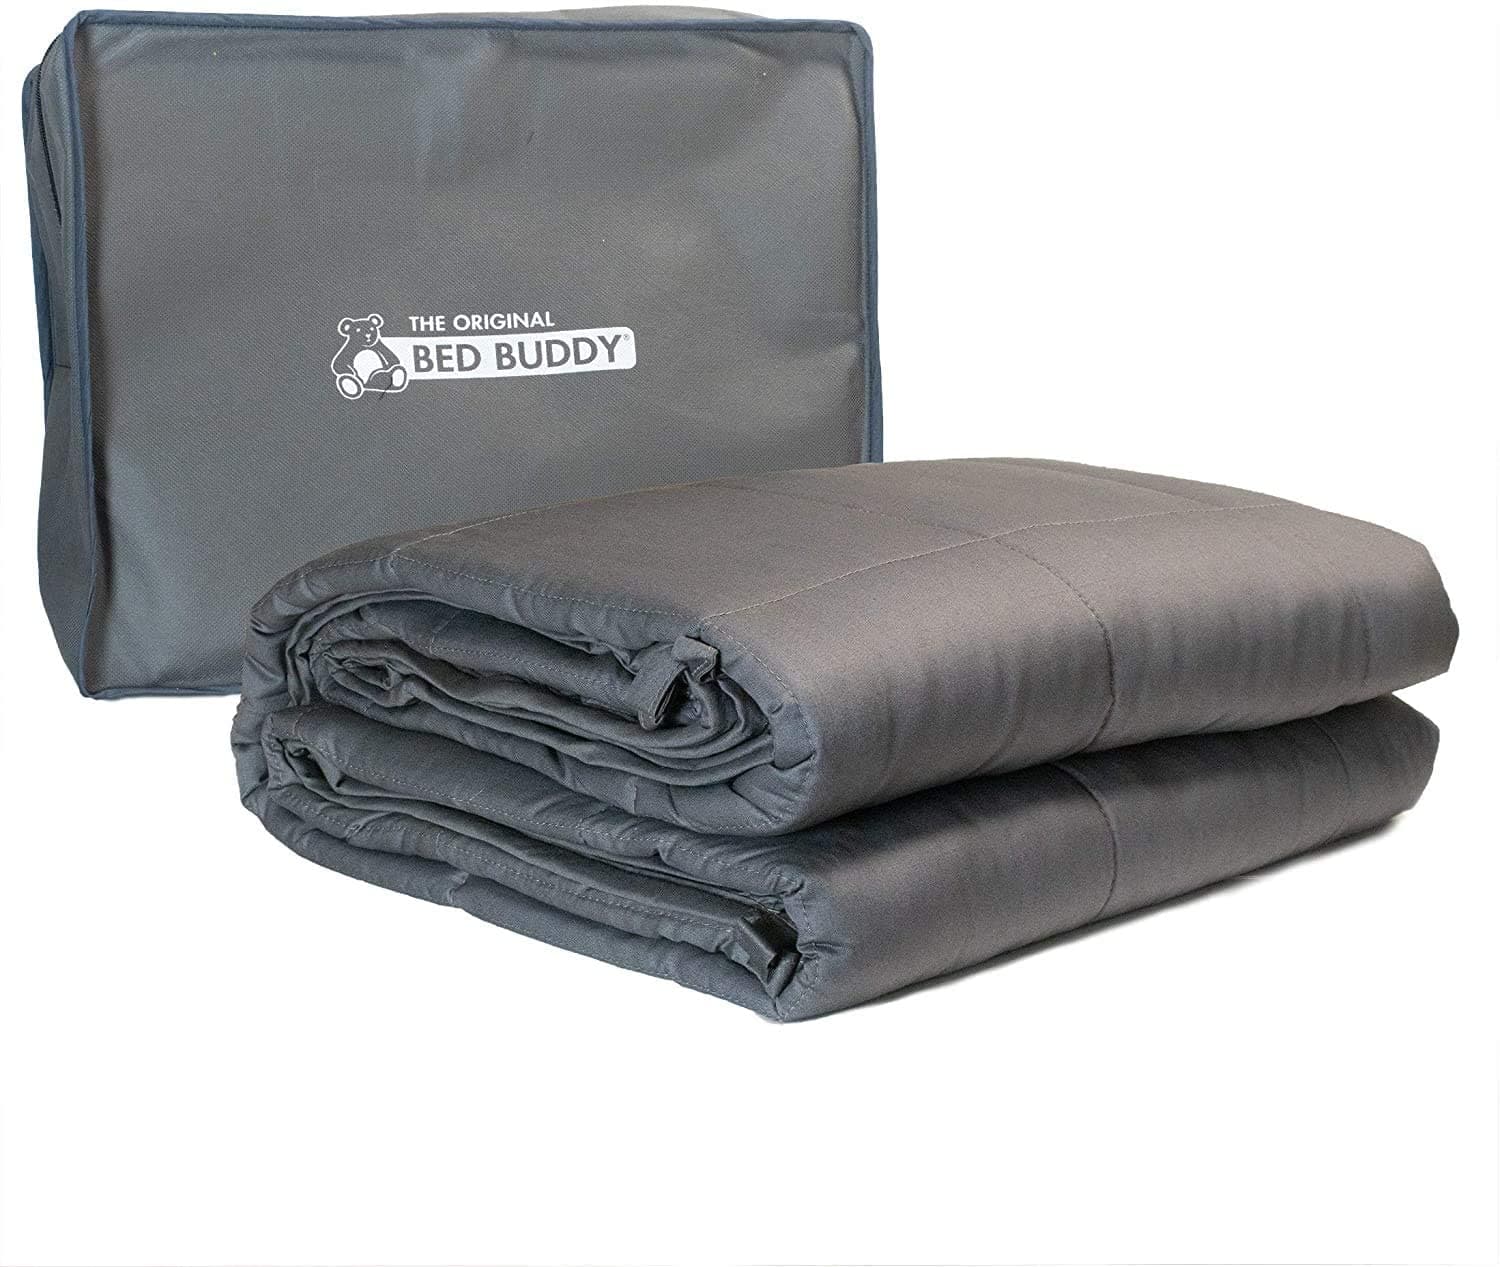 Compass Health Weighted Blankets Compass Health Bed Buddy Weighted Blanket, Adult Size